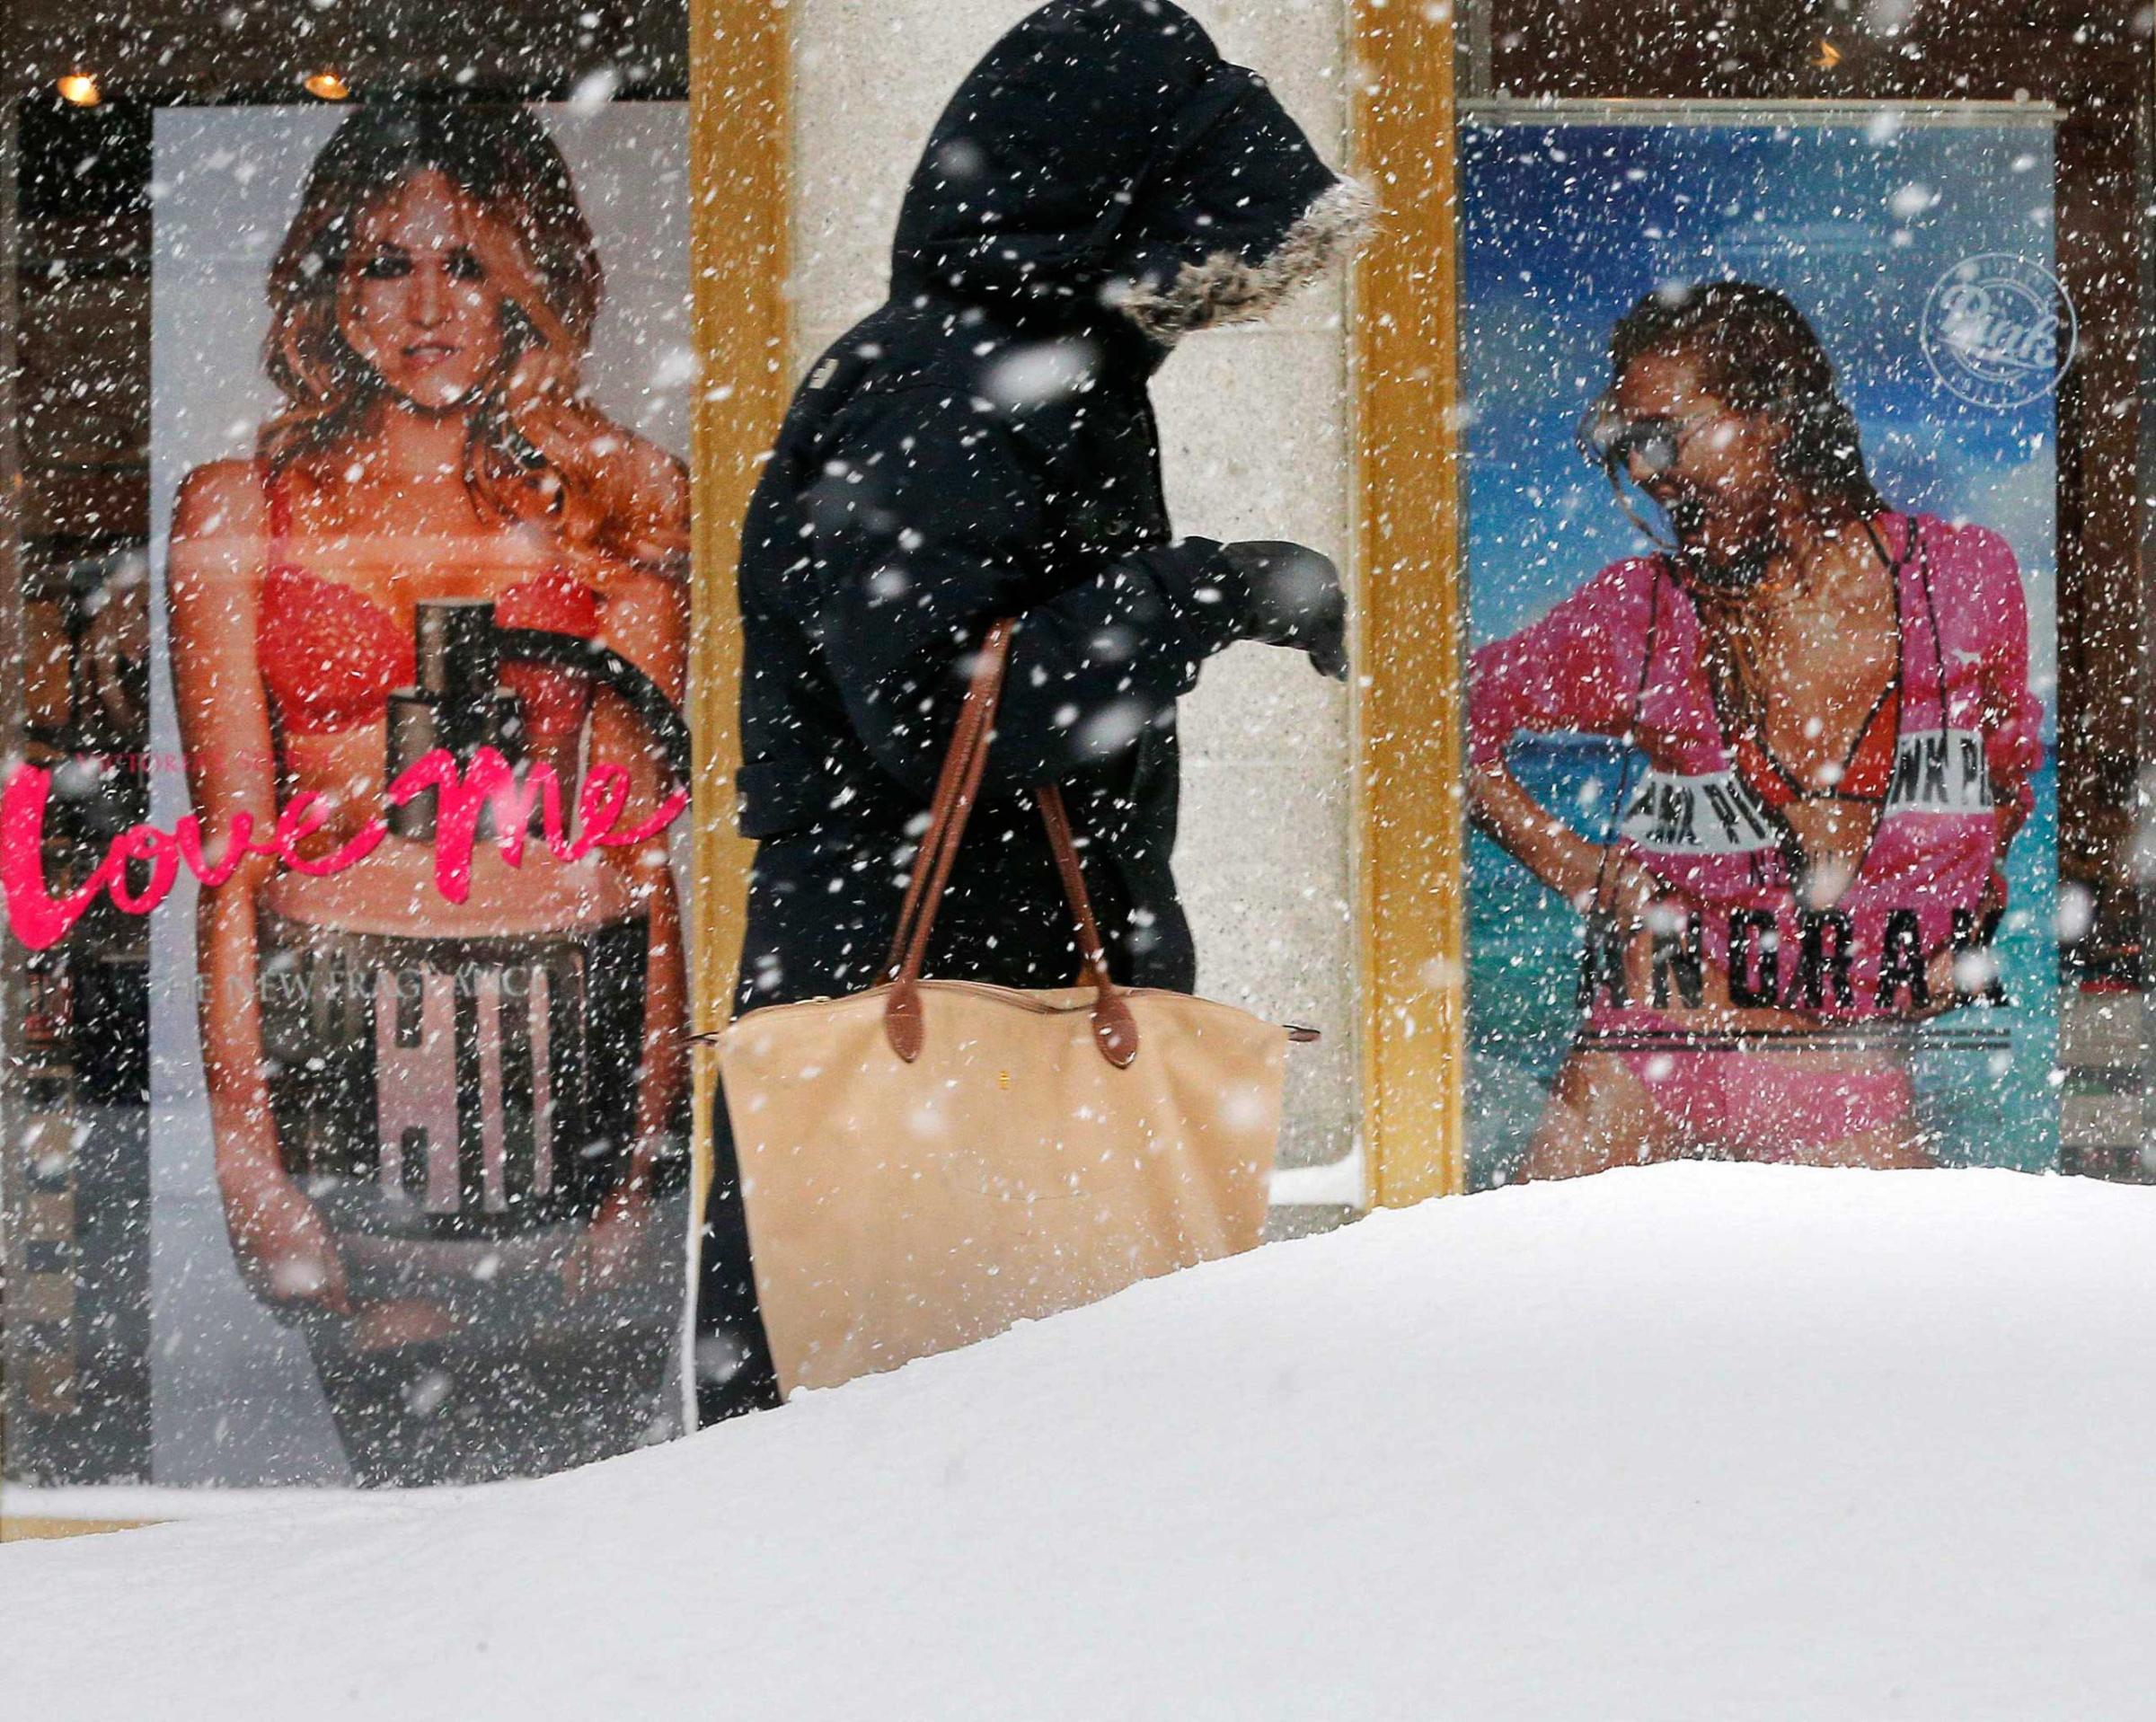 A pedestrian makes their way past a Victoria's Secret store along a snow covered street during a winter snowstorm in Boston